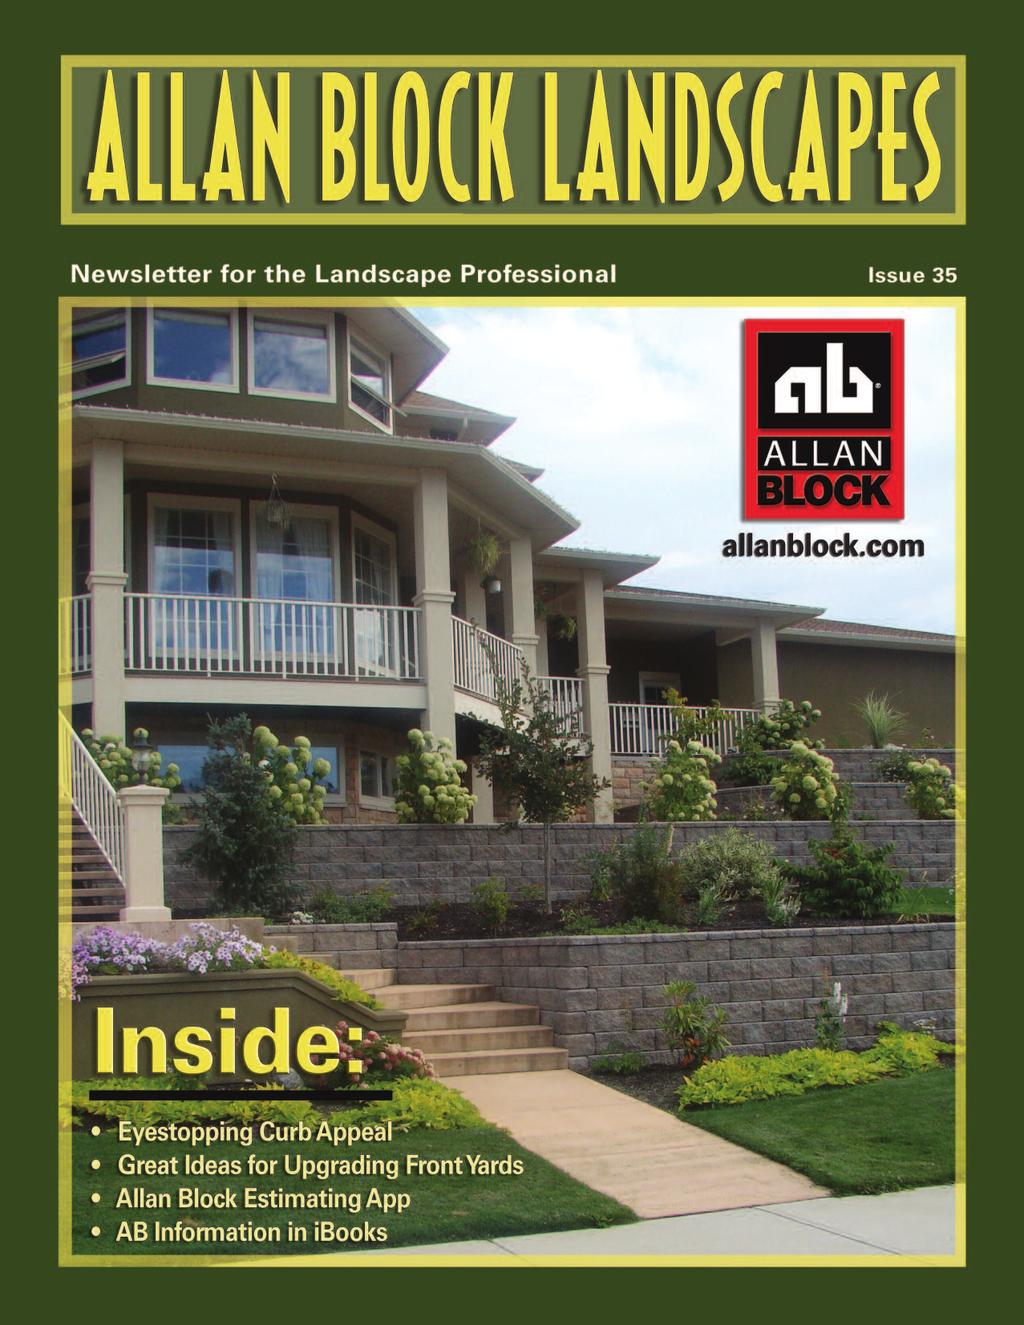 Make A Stunning Entrance Allan Block Has An App For That Get it here now!